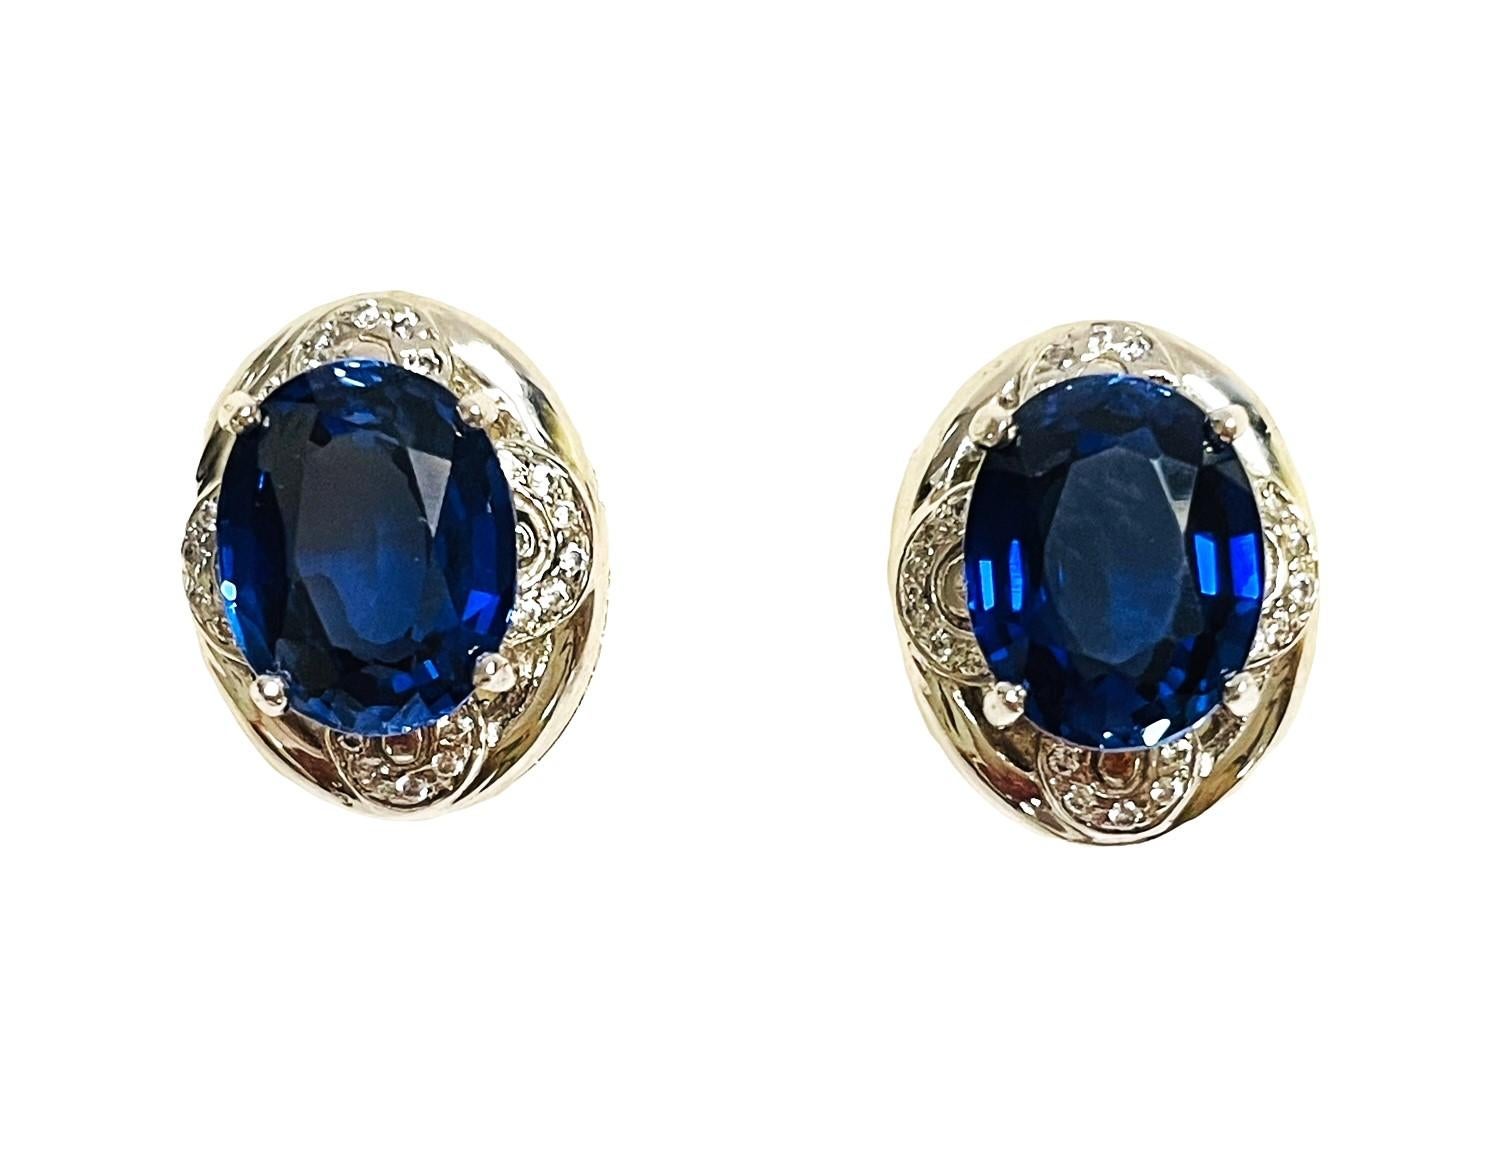 These stones were mined in Africa.  Each earrings has a 2.80 carat sapphire.  They measure 10.7 x 8.4 mm.  They are post style earrings.  The earrings themselves are 16 x 12.6 mm.  Very beautiful indeed.  Sure to get noticed.  The weight in Grams is